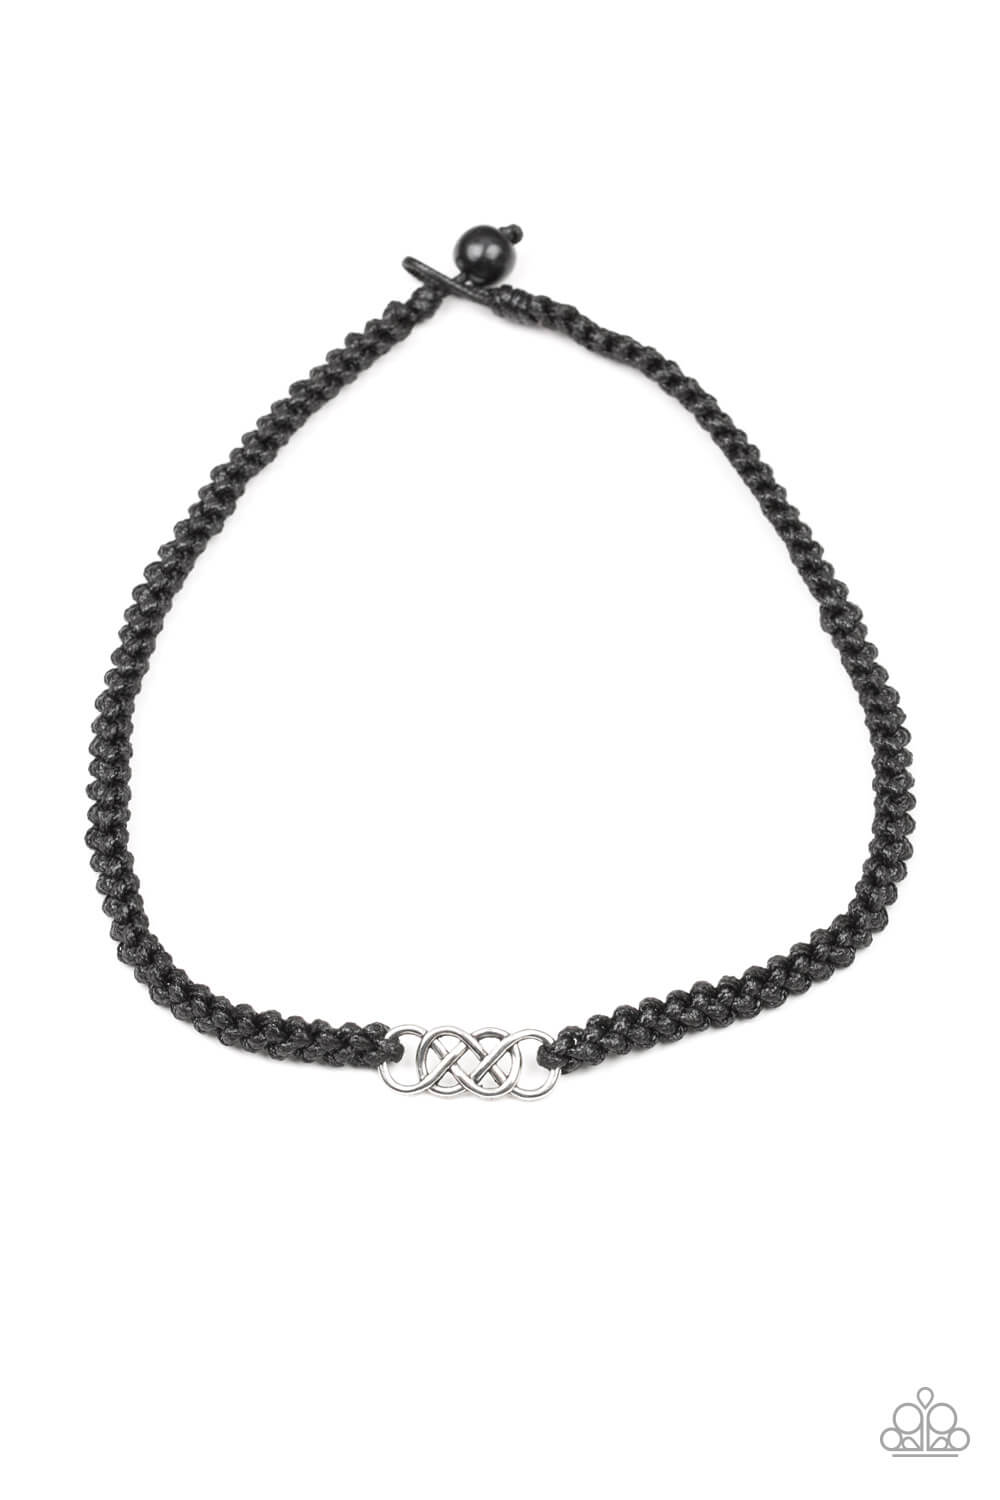 Just In MARITIME - Black Necklace - Princess Glam Shop